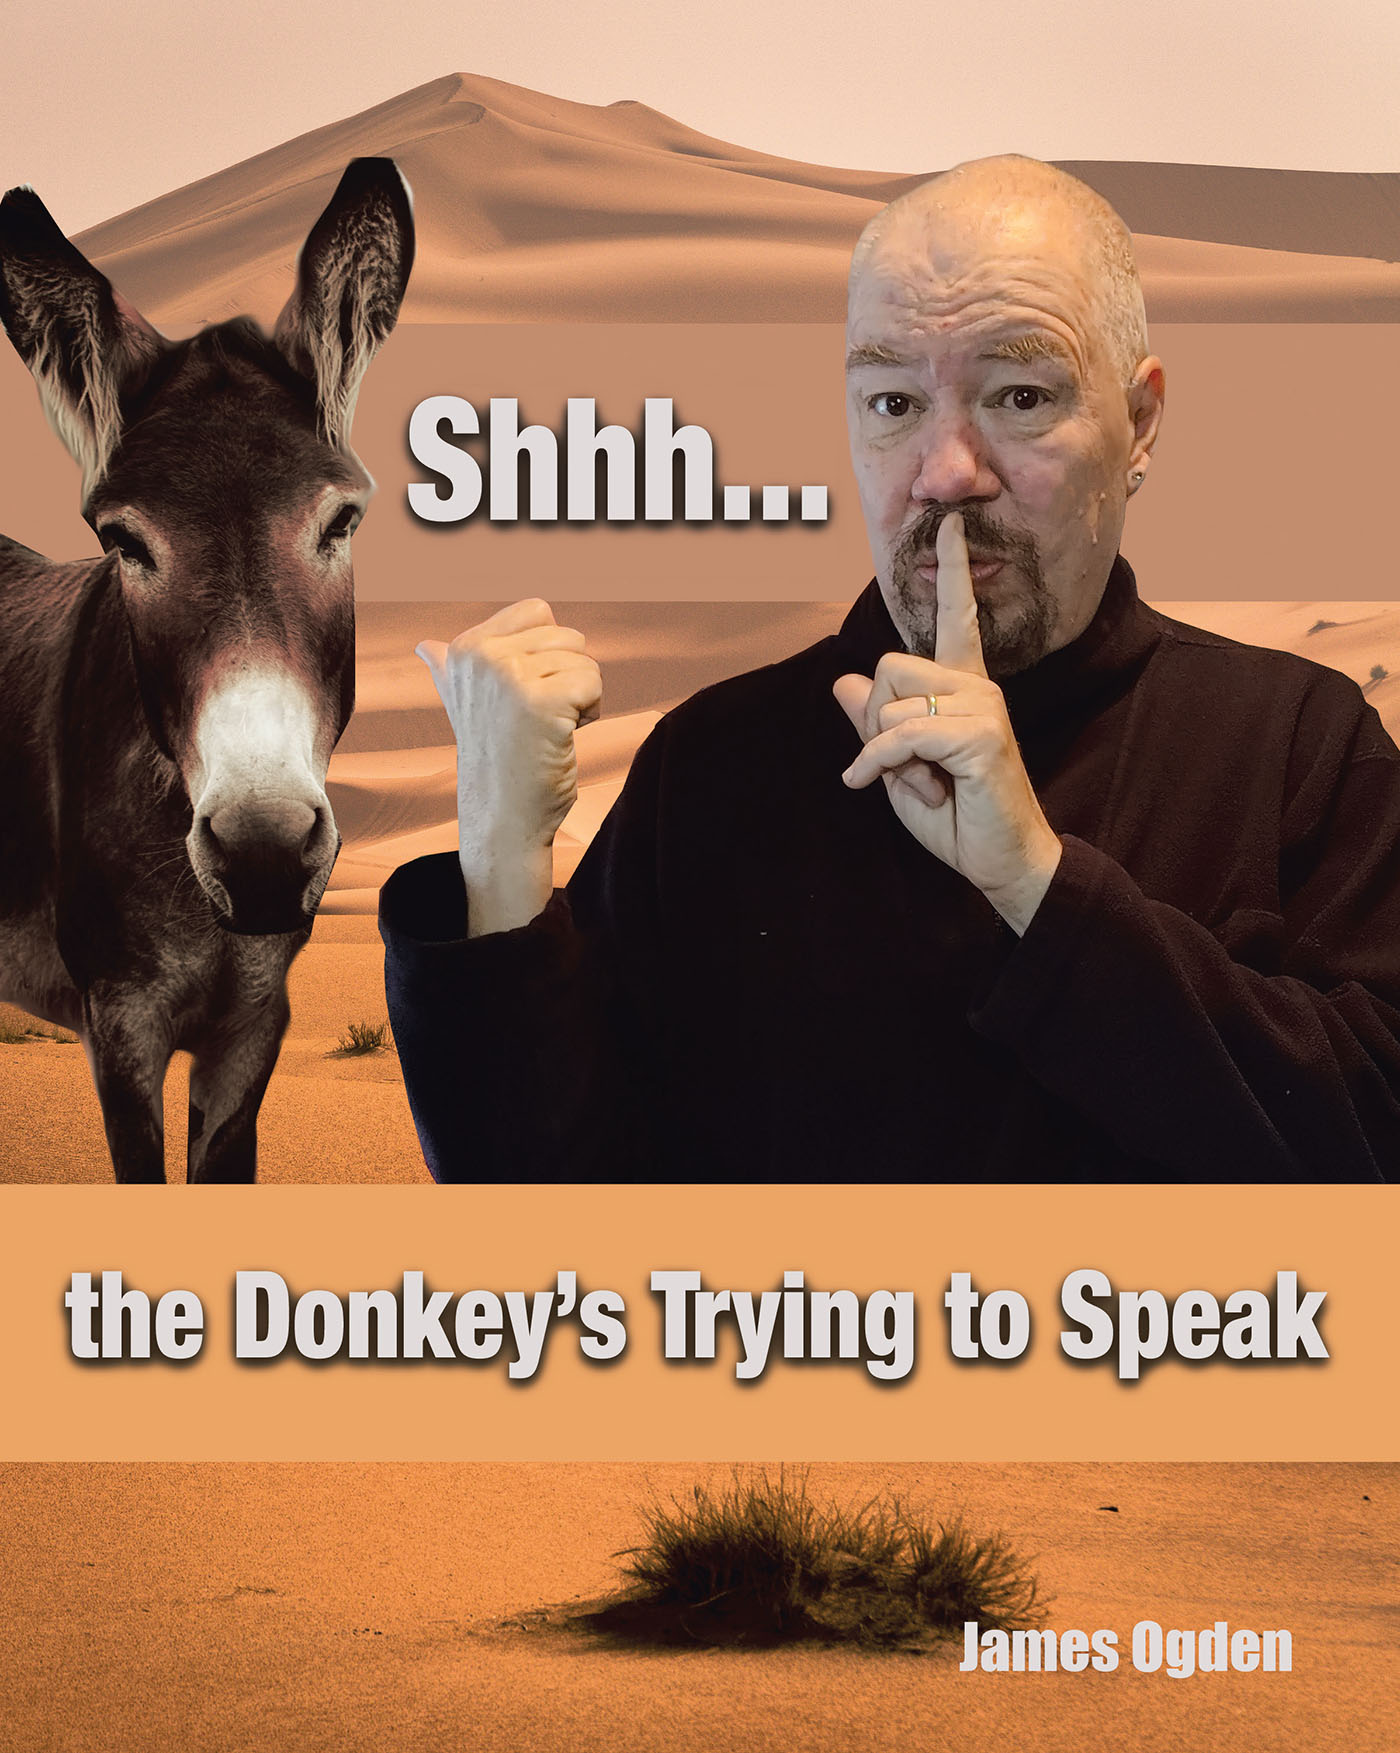 James Ogden’s Newly Released "Shhh... The Donkey’s Trying to Speak" is a Creative Collection of Stories That Explore the Ways in Which God Speaks, Leads and Teaches Us